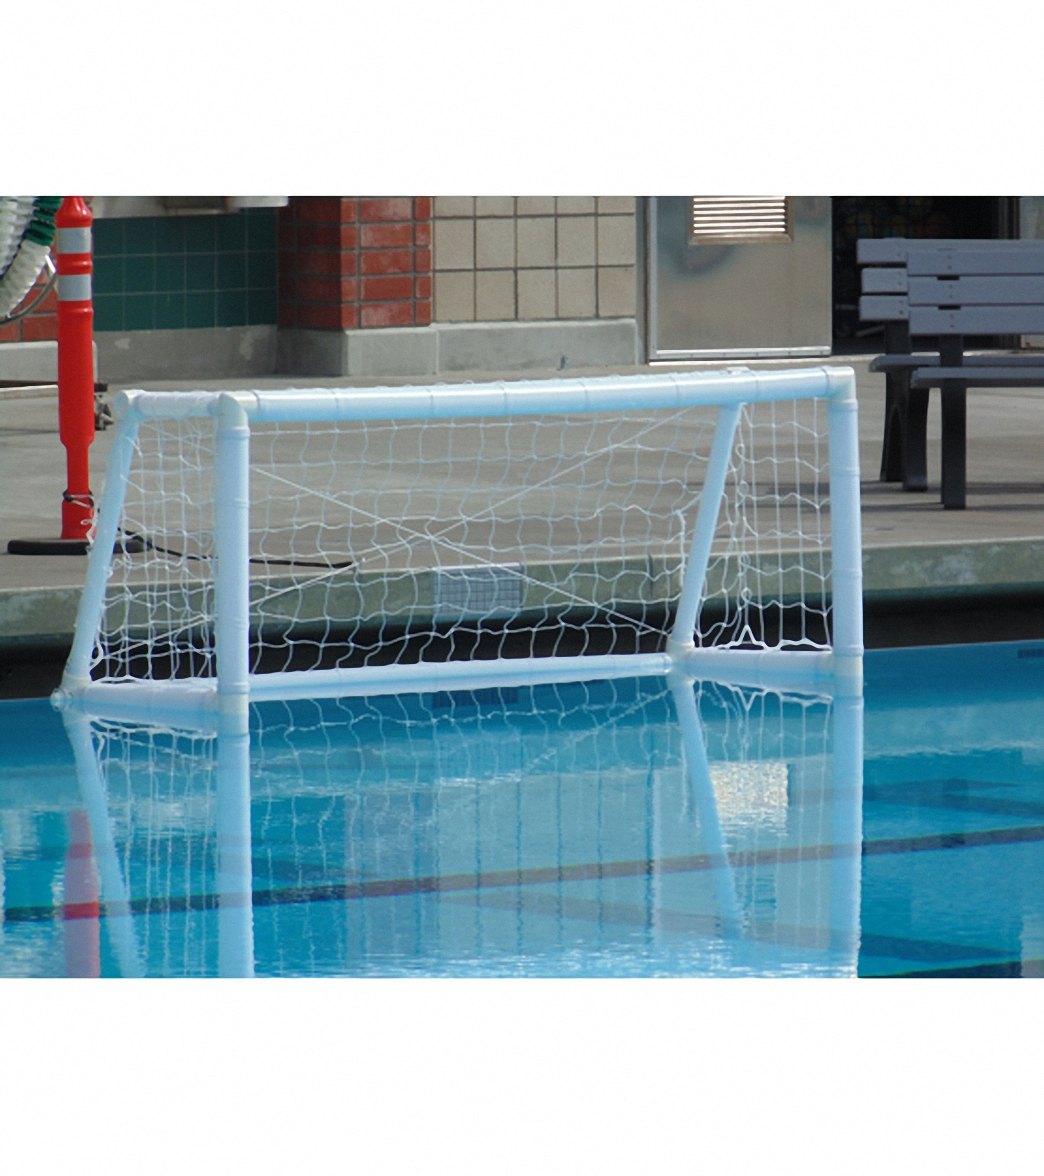 Air Goal Sports Professional AGE Group 10u Goal at SwimOutlet.com